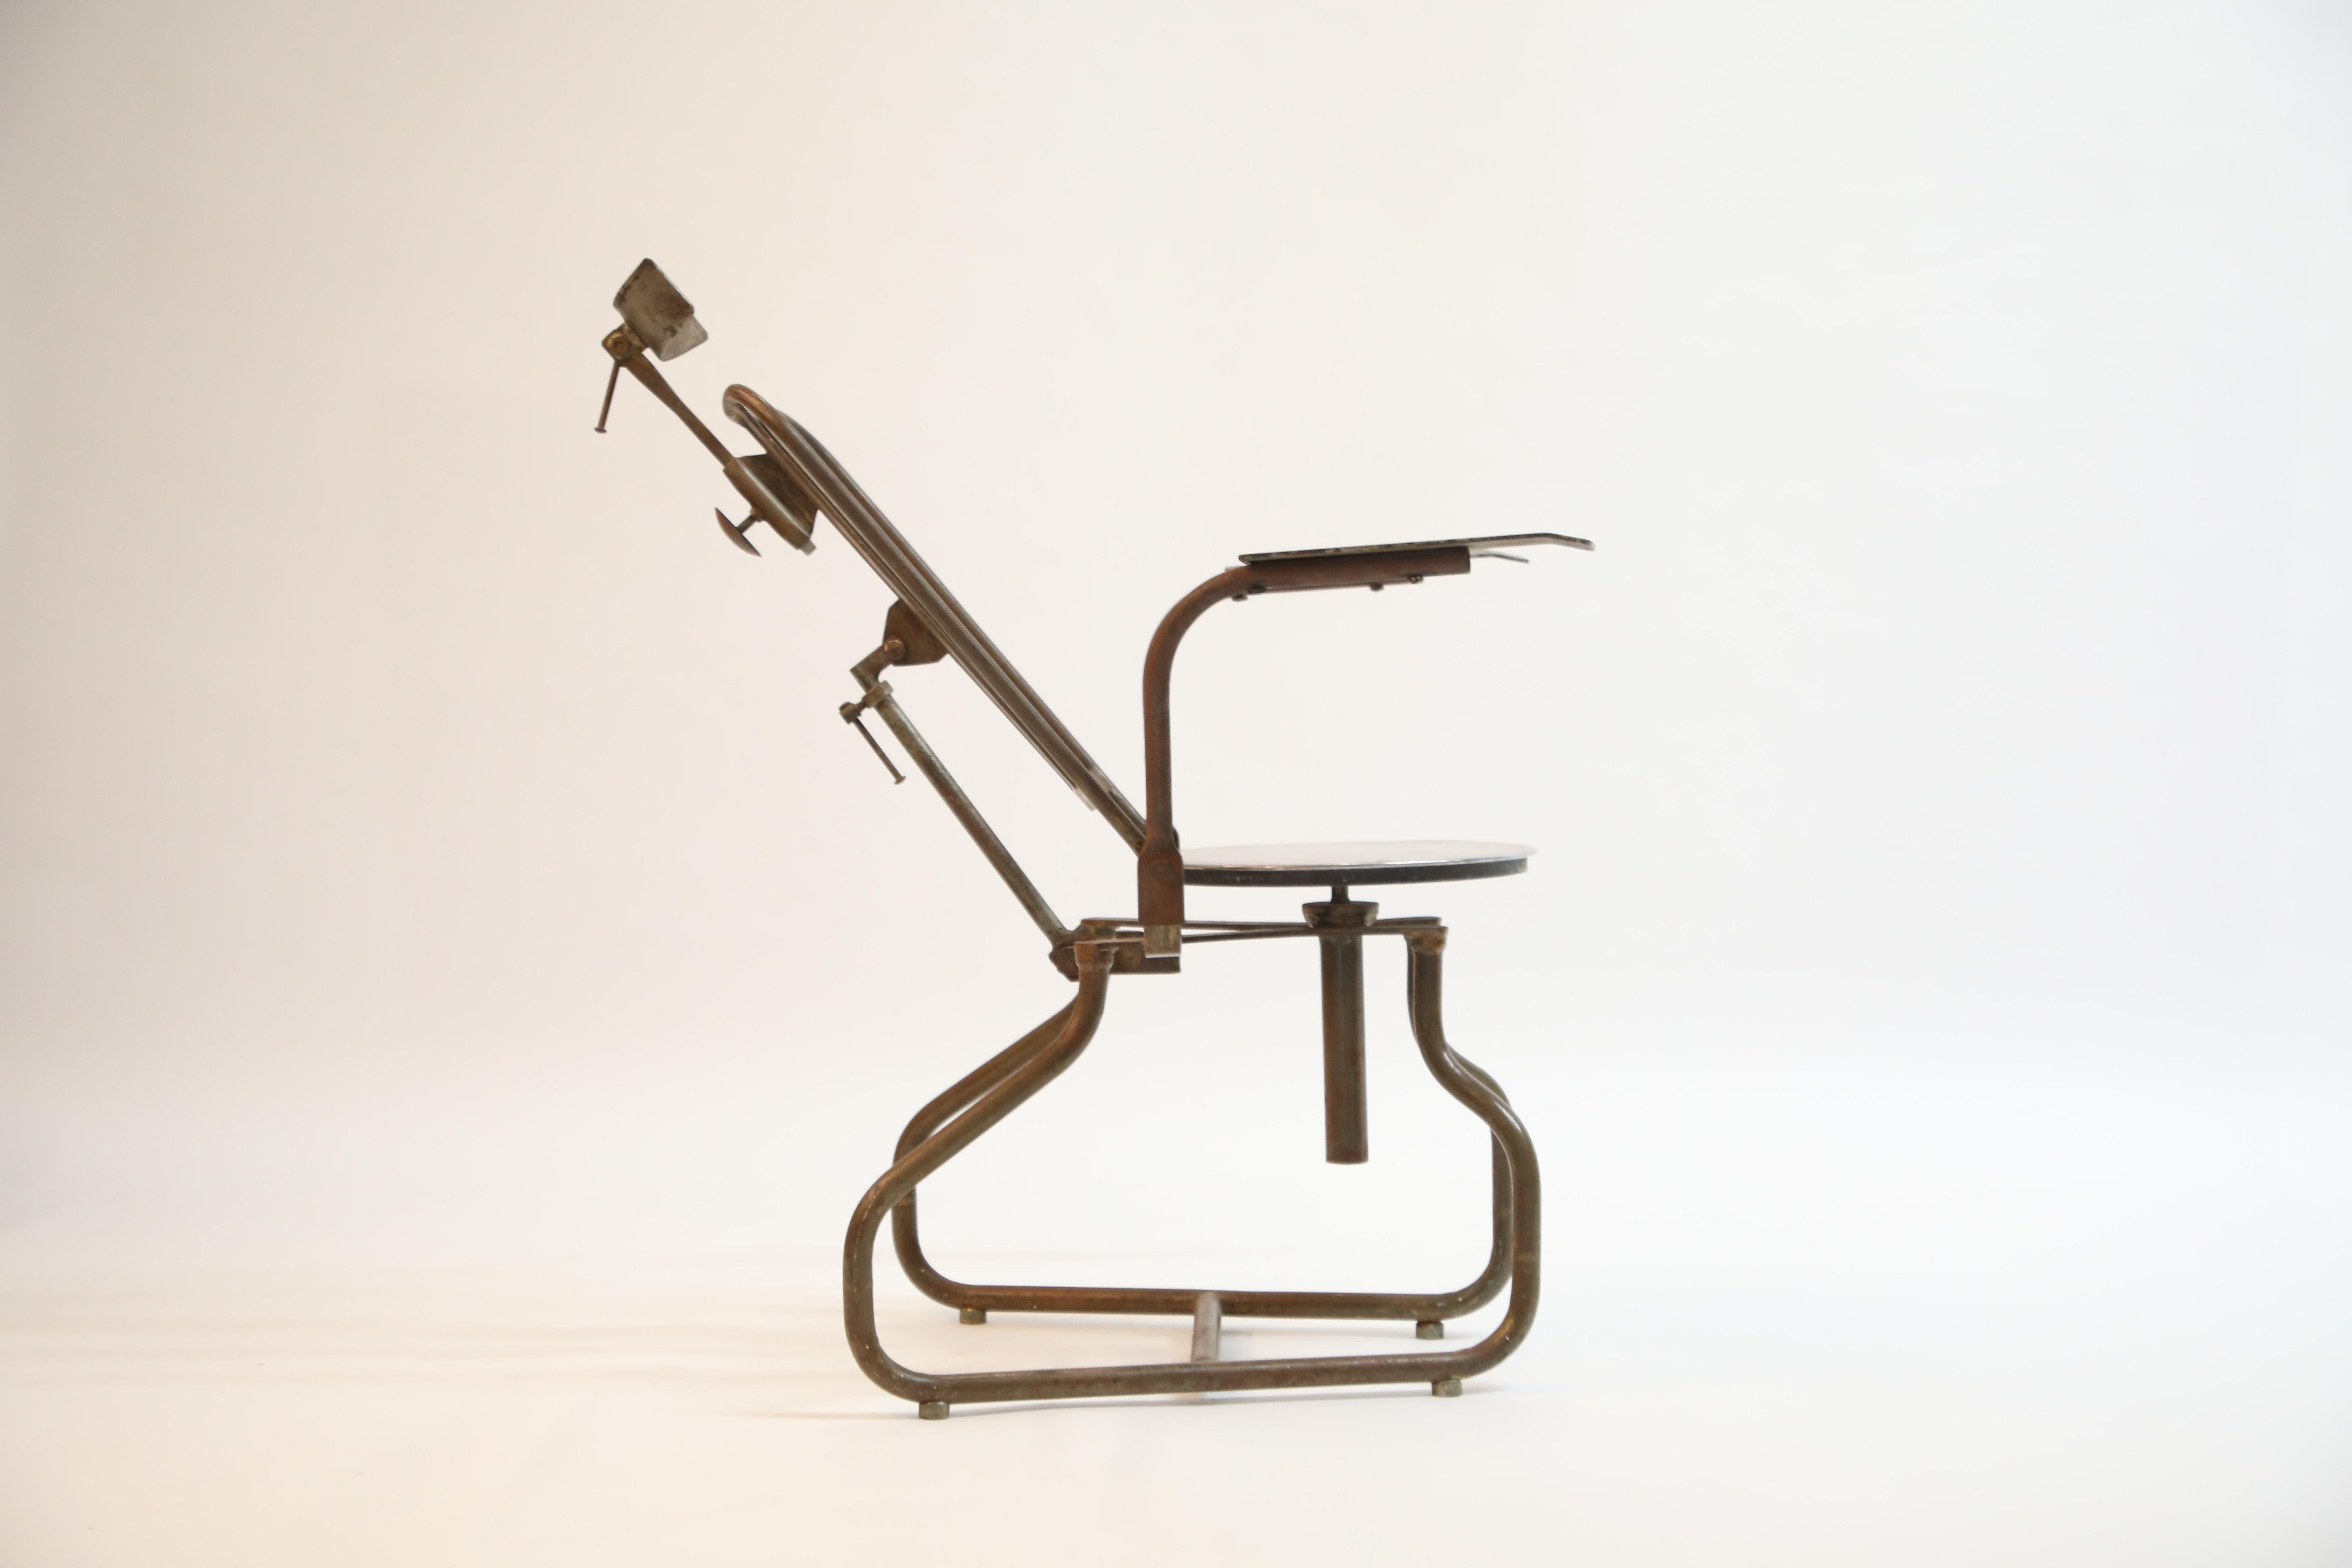 Industrial Steel Dentist Chair or Sculpture from Brazil, circa 1900s (Industriell)